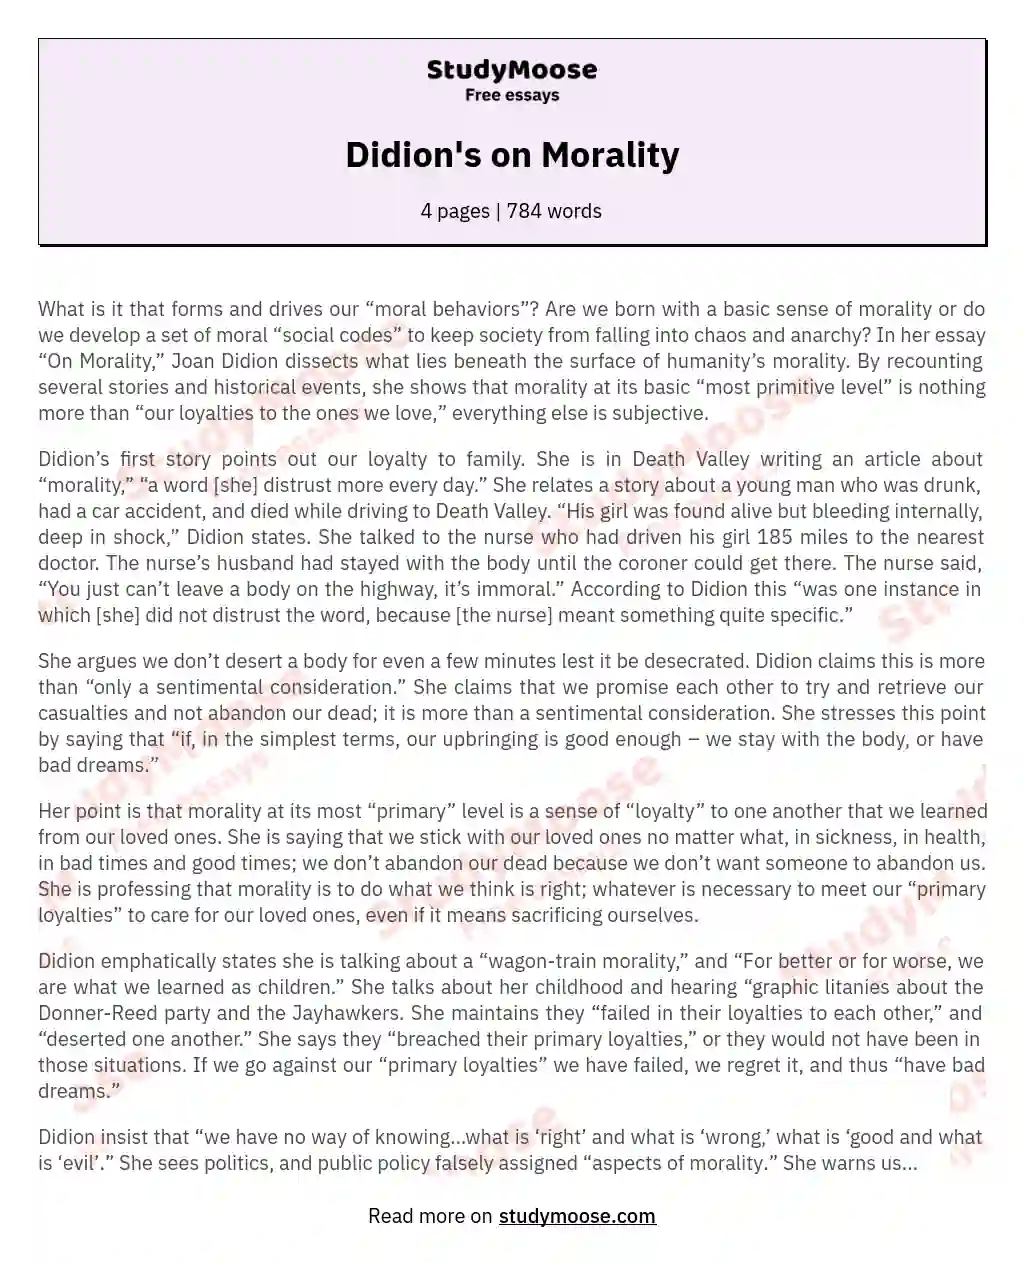 Didion's on Morality